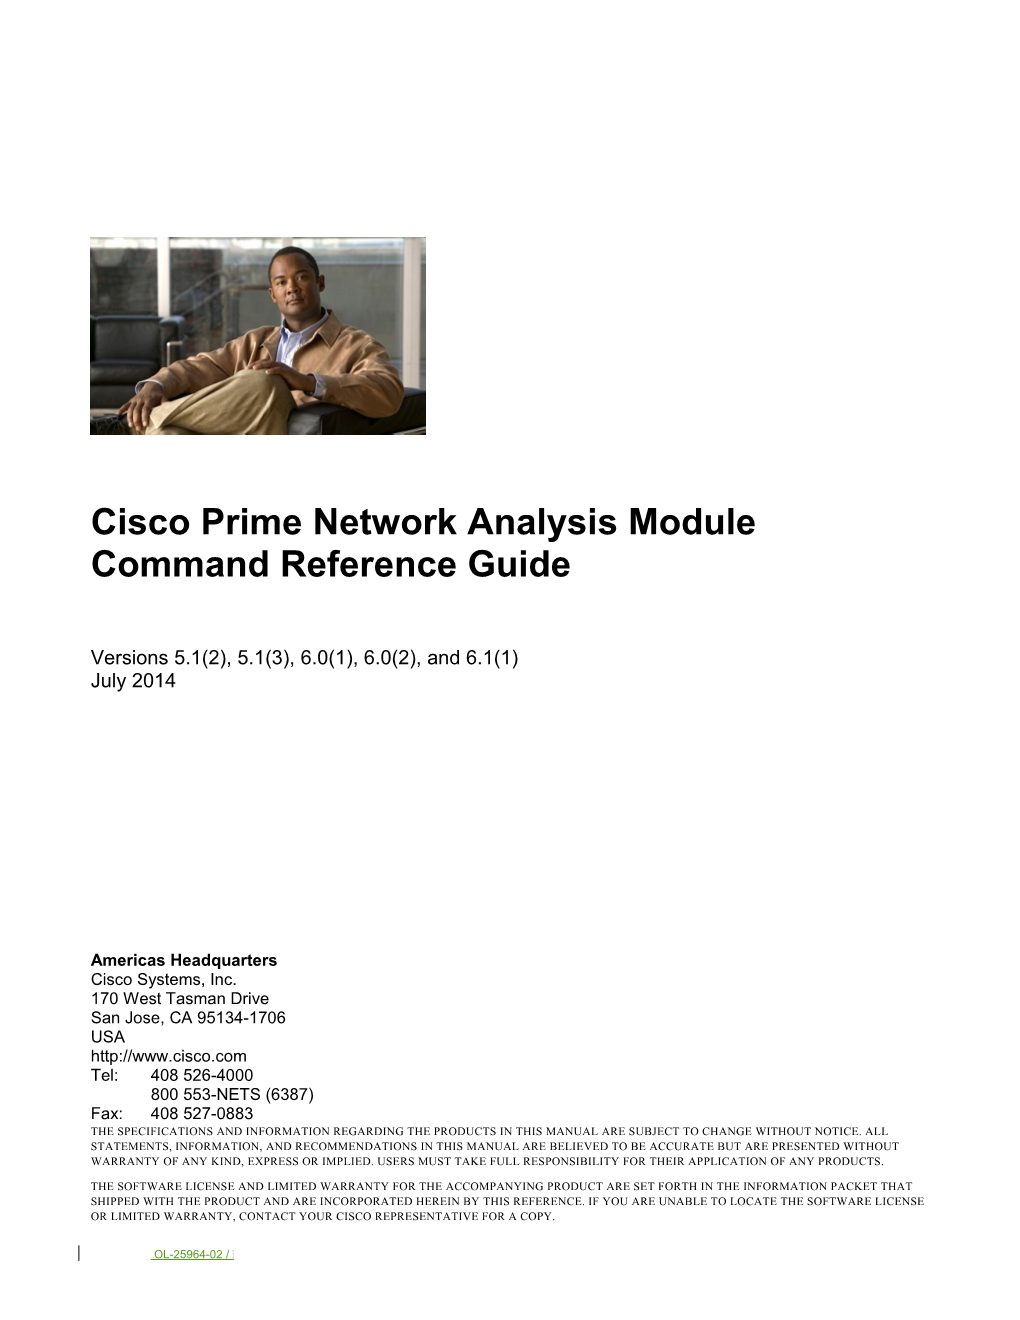 Cisco Prime Network Analysis Module Command Reference Guide